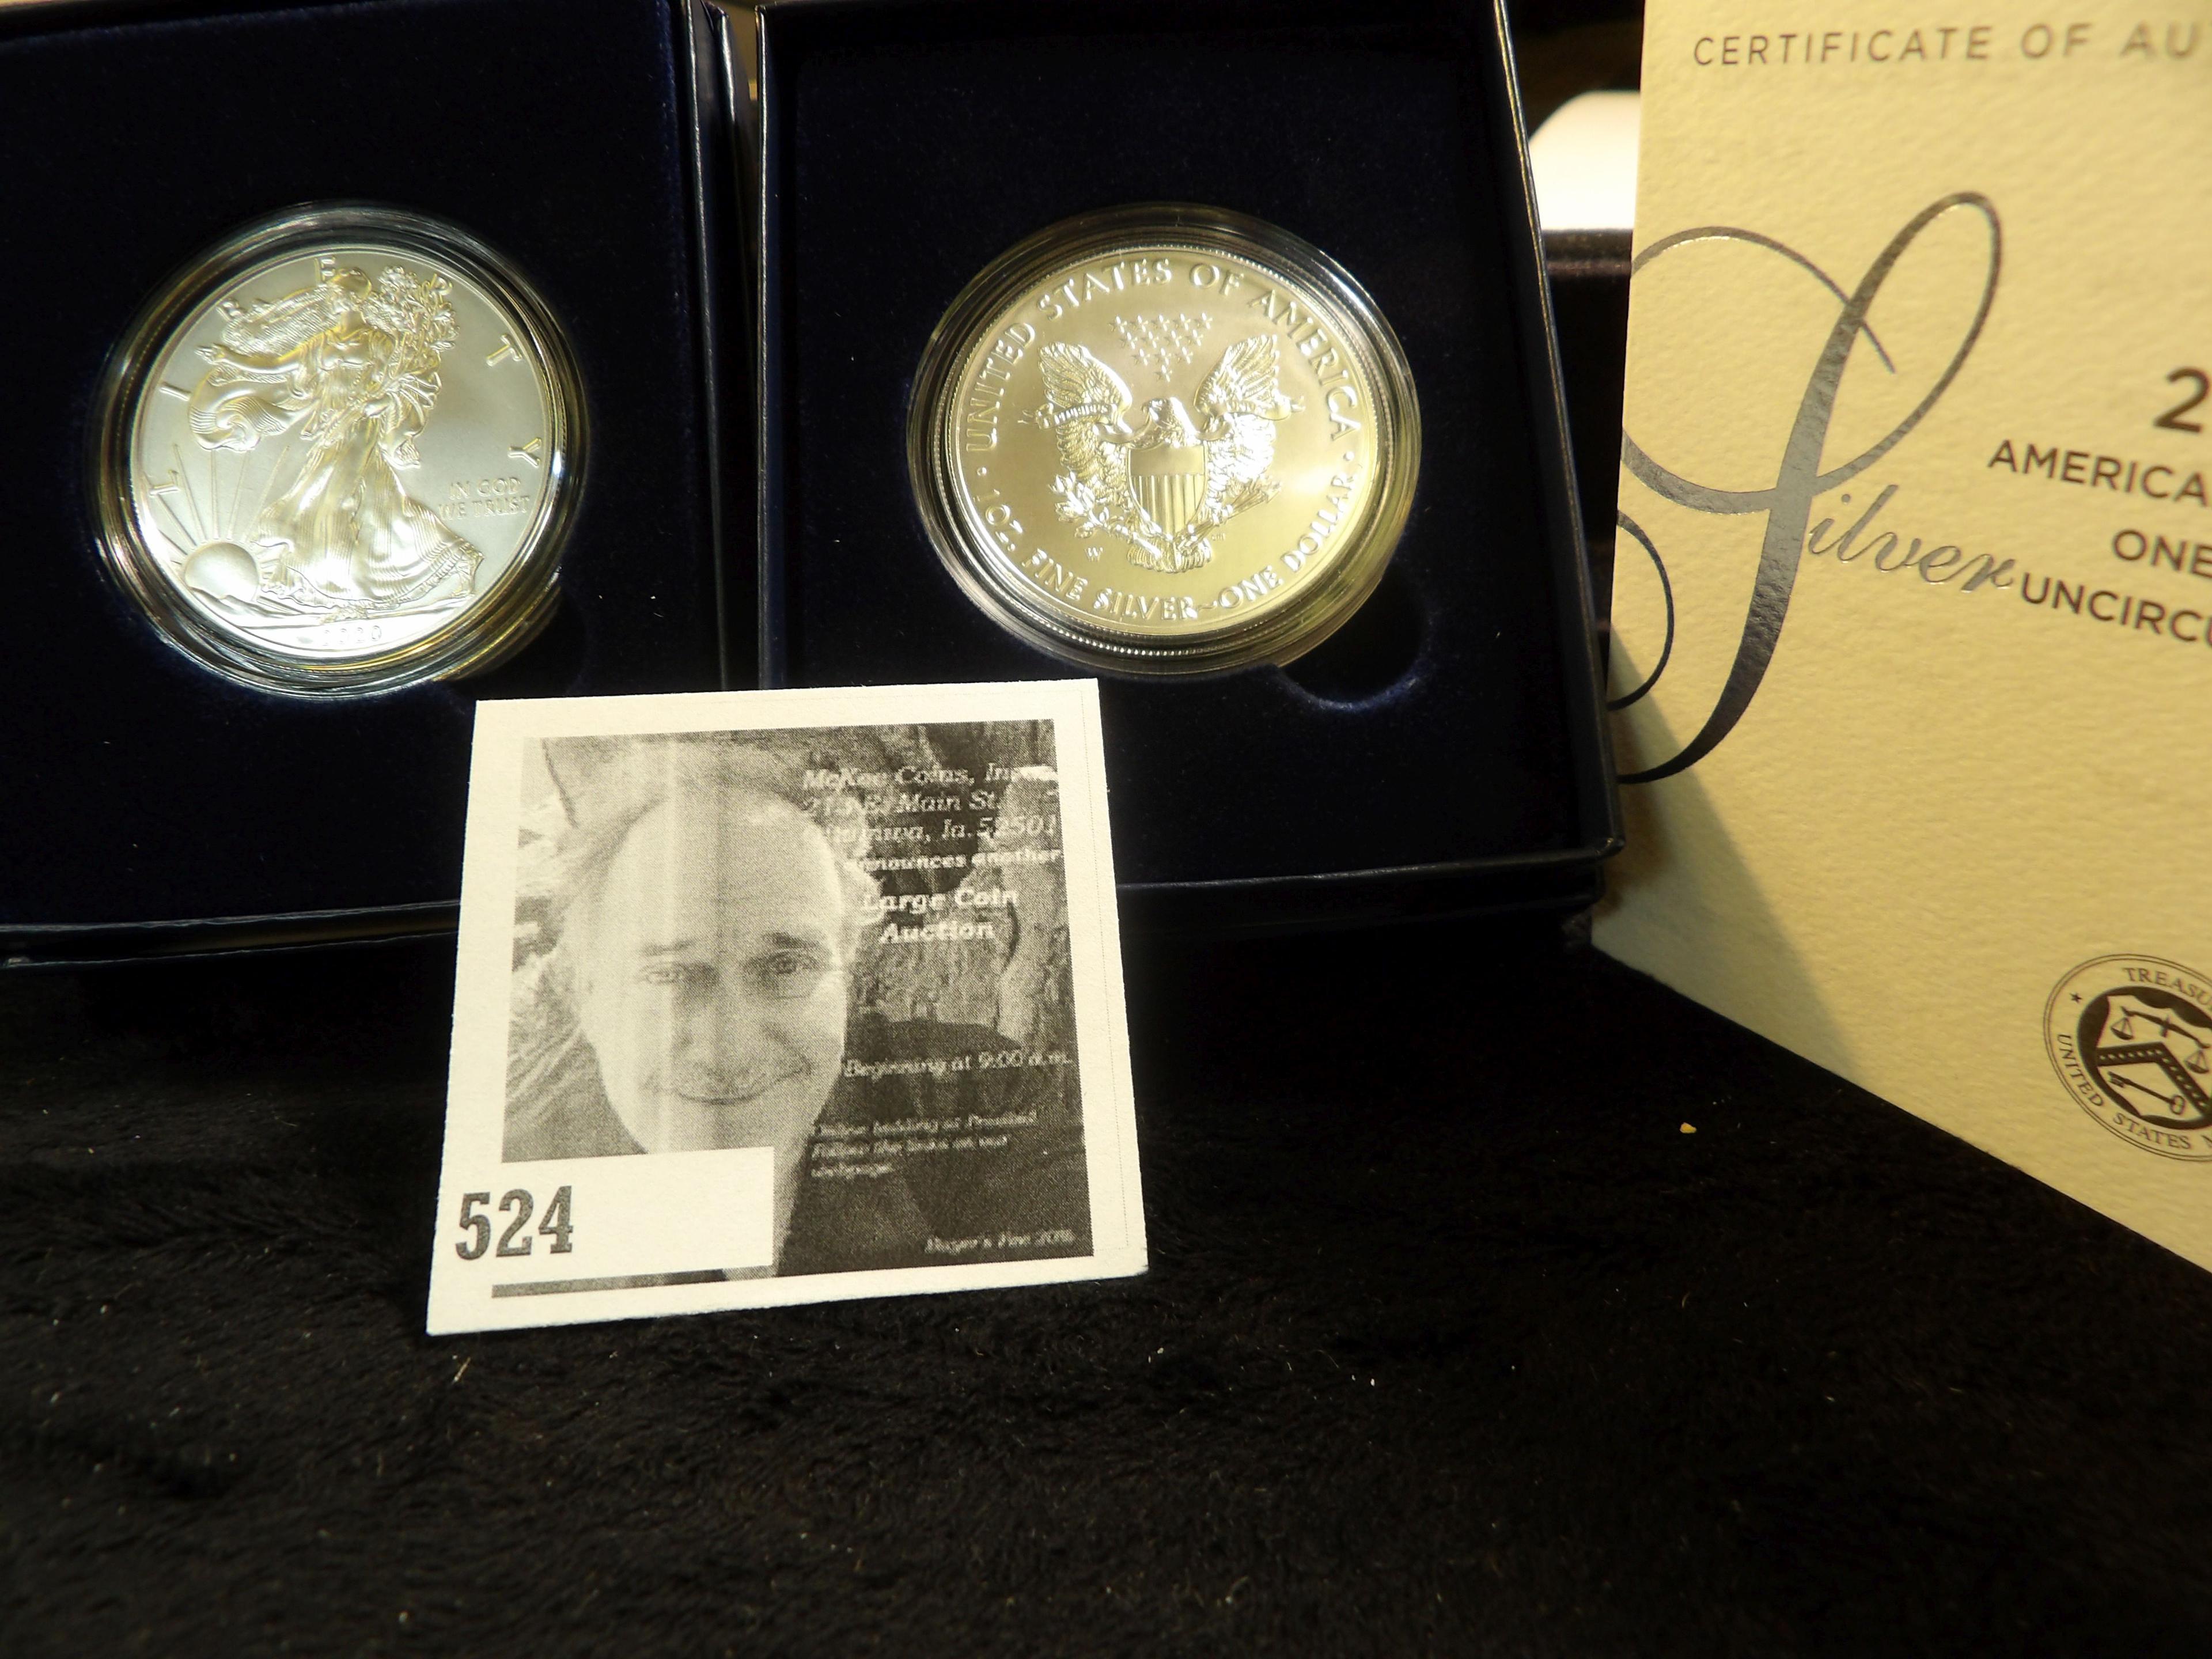 Pair of 2020 W U.S. Uncirculated Silver Eagle Silver Dollars in original boxes of issue with C.O.A.s